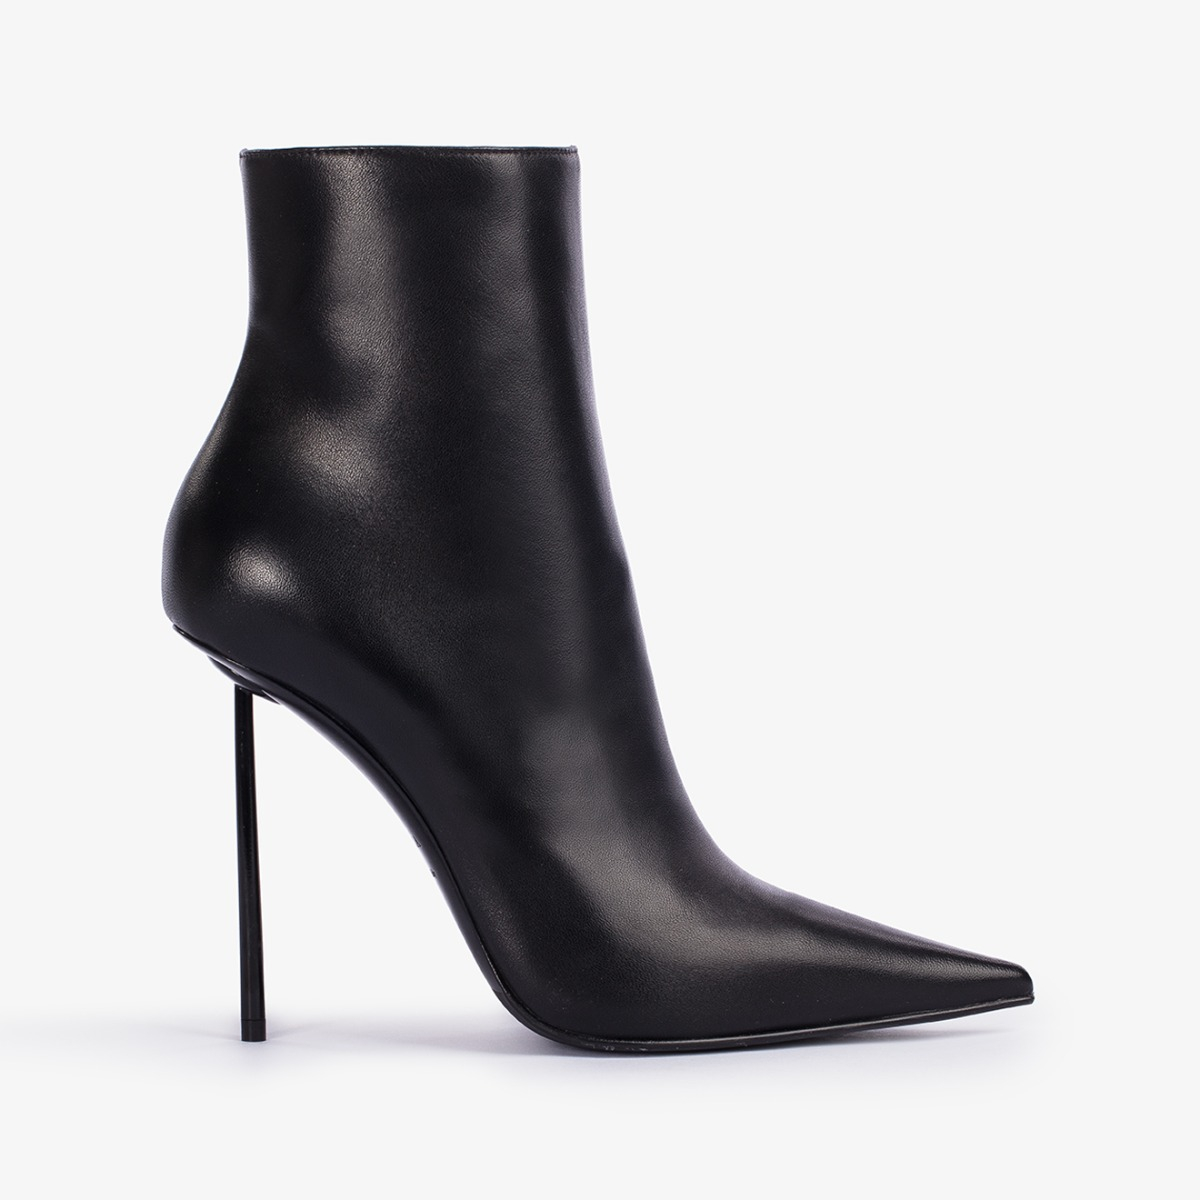 BELLA ANKLE BOOT 120 mm - Le Silla | Official Online Store